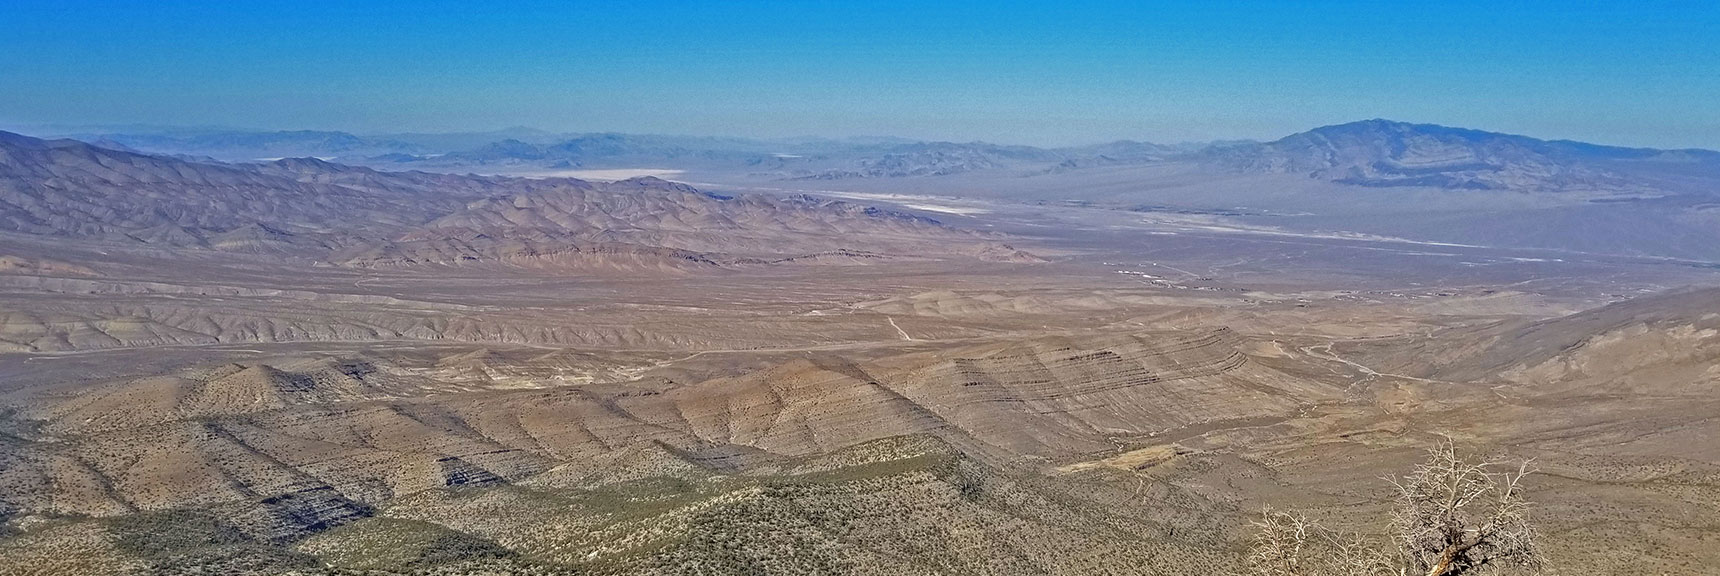 View Down Kyle Canyon to Where My Car is Parked at the End of Harris Springs Rd, Straight Line, Center | La Madre Mountain,, El Padre Mountain, Burnt Peak | La Madre Mountains Wilderness, Nevada